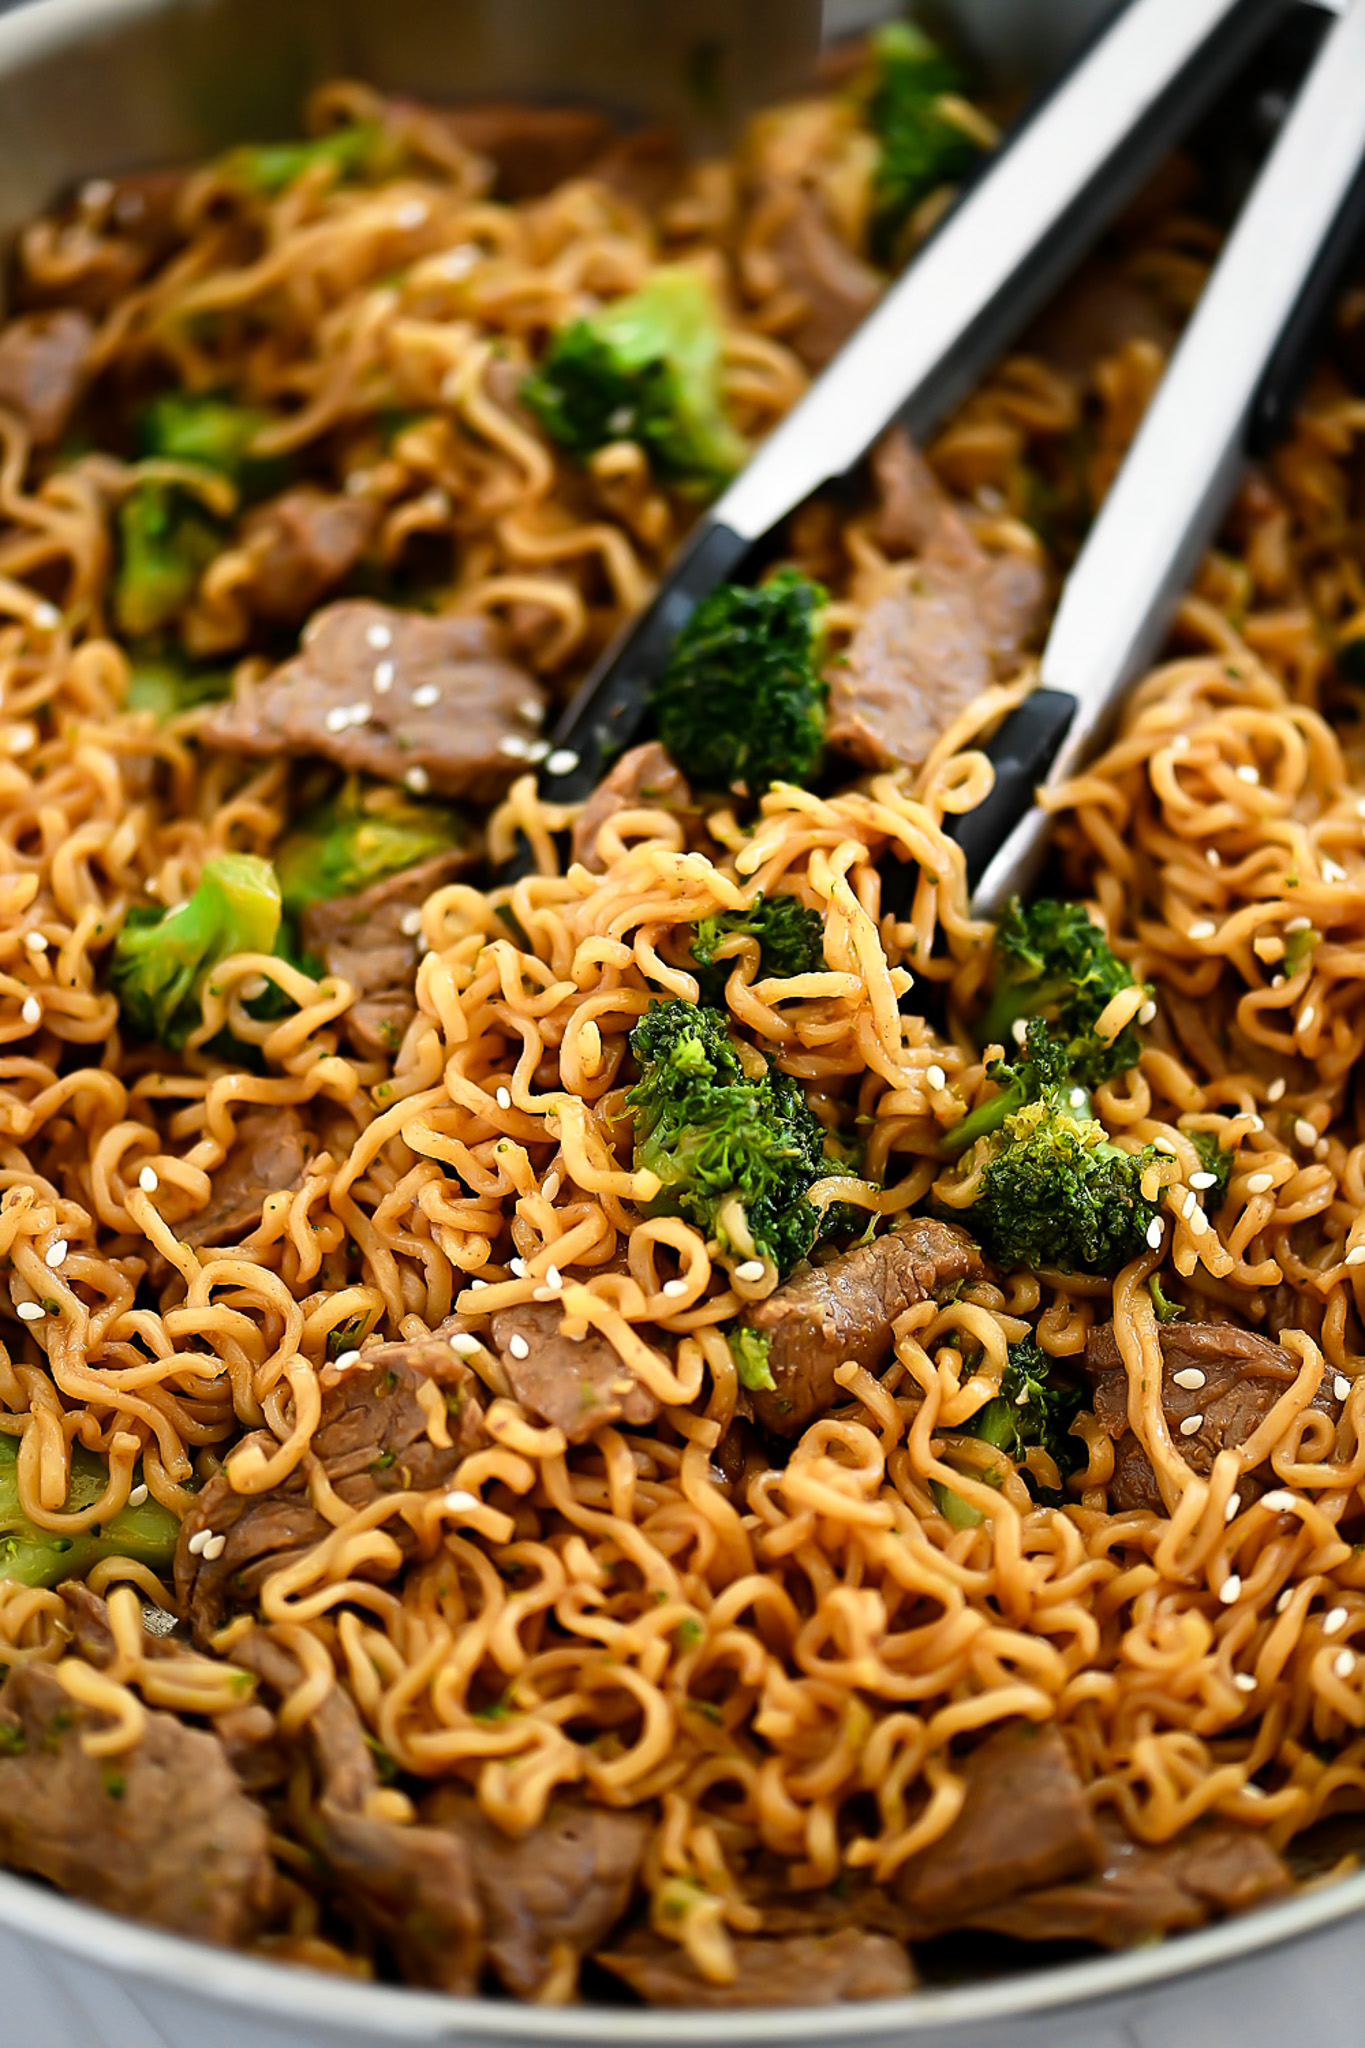 Ramen Noodles with Beef and Broccoli